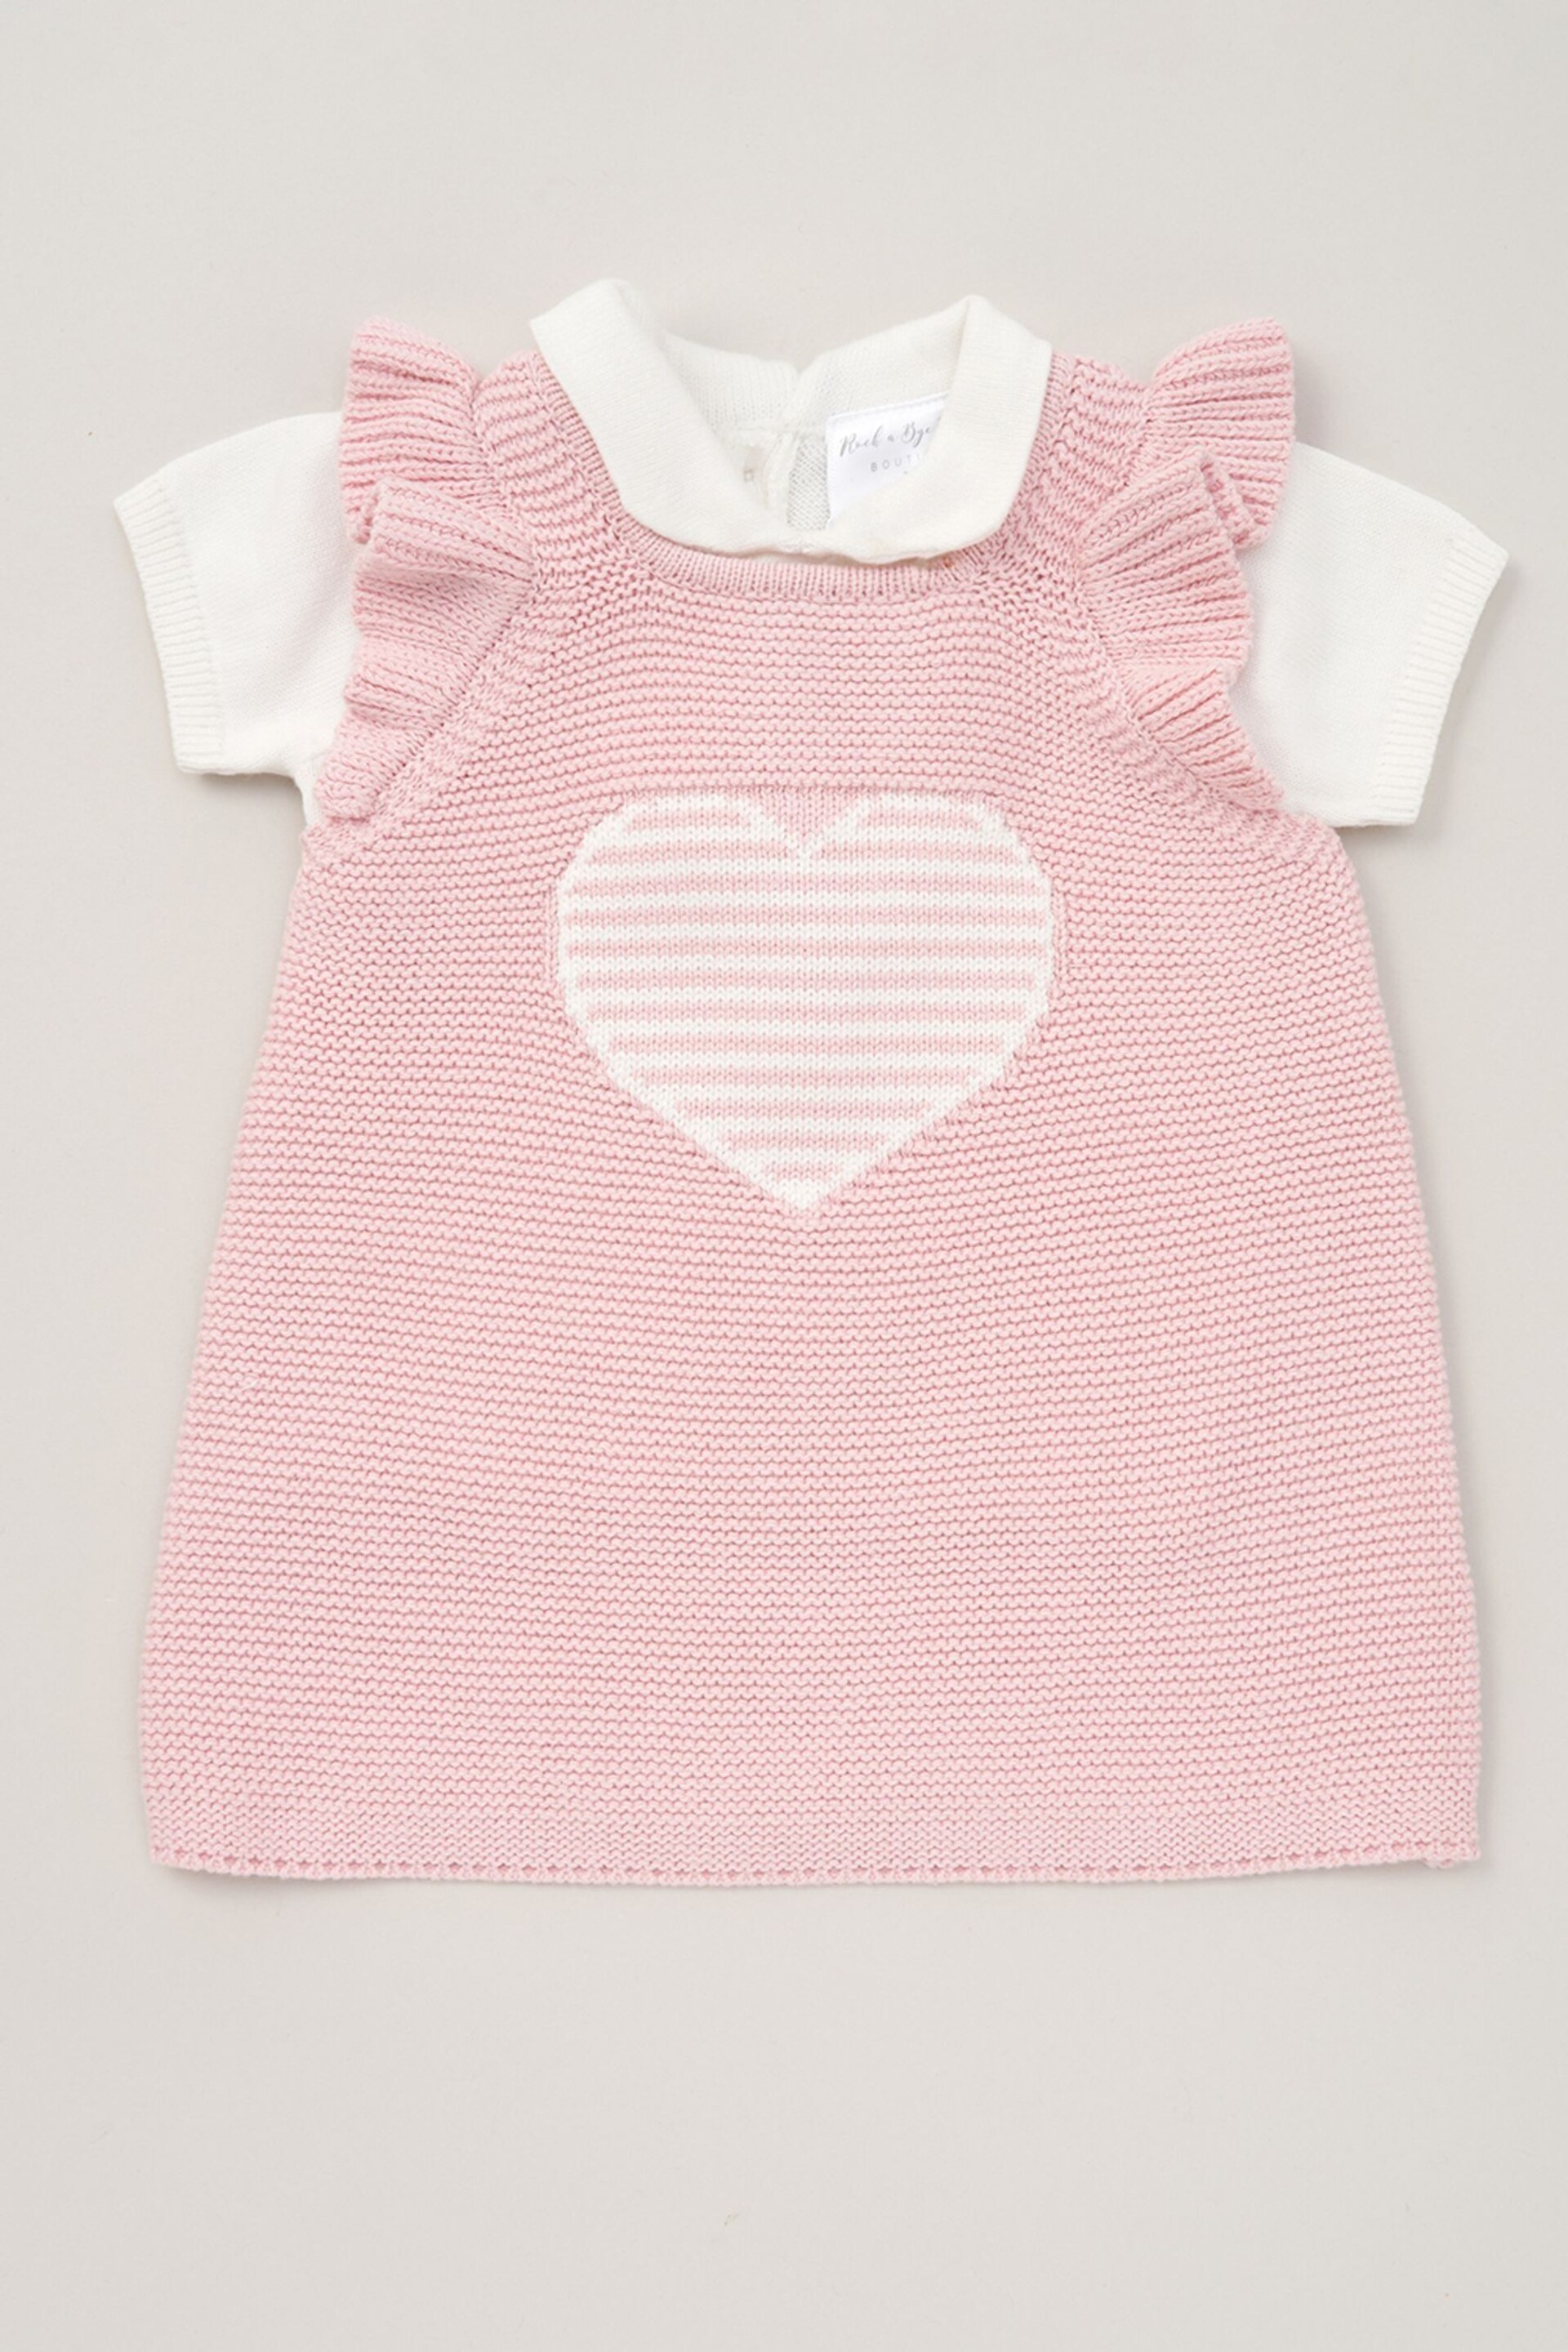 Rock-A-Bye Baby Boutique Pink Cotton Jersey T-Shirt and Knit Dress Set - Image 1 of 4